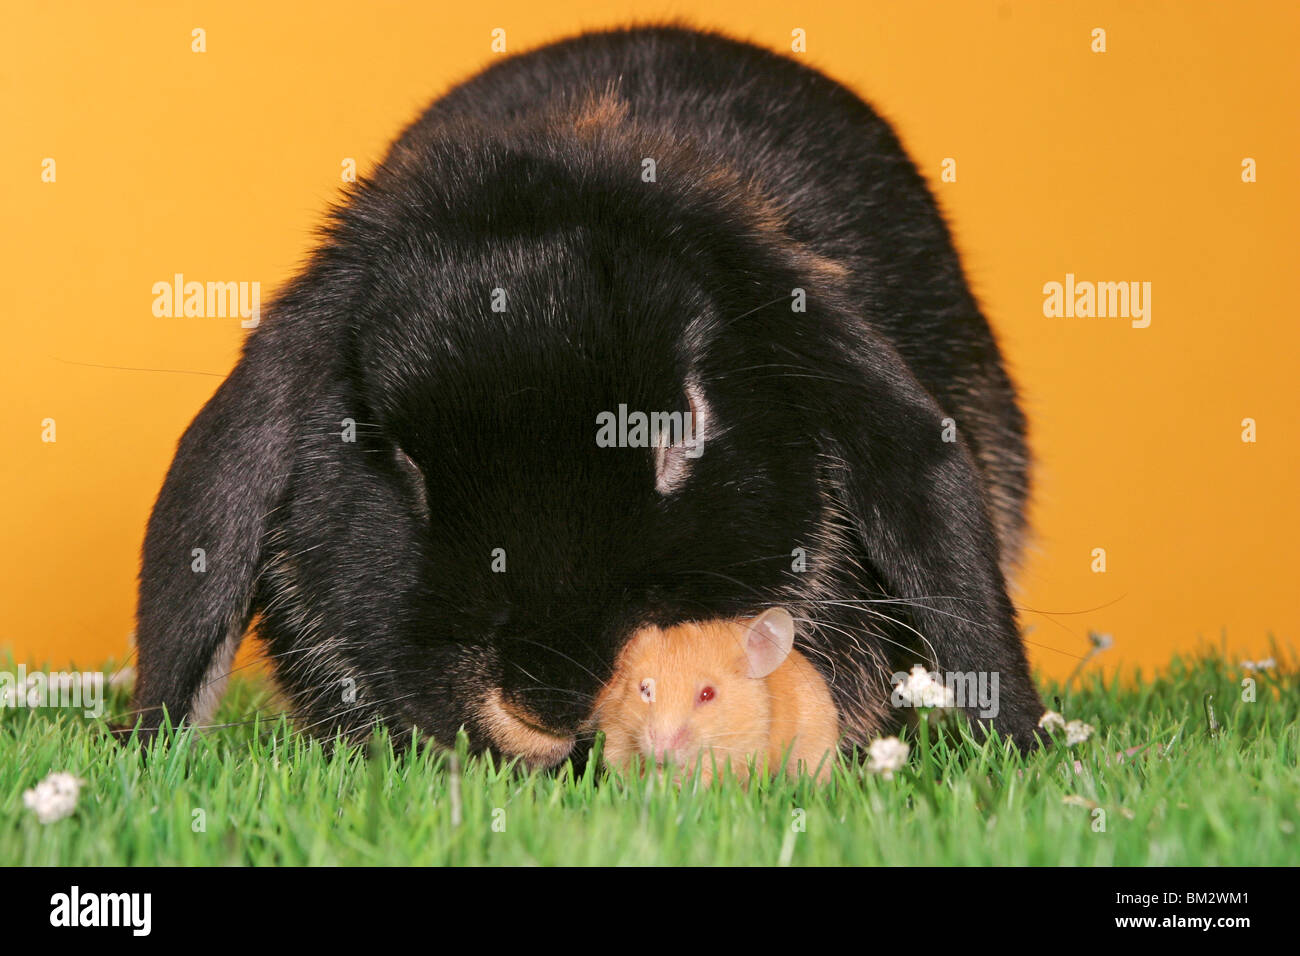 Widder & Maus / bunny & mouse Stock Photo